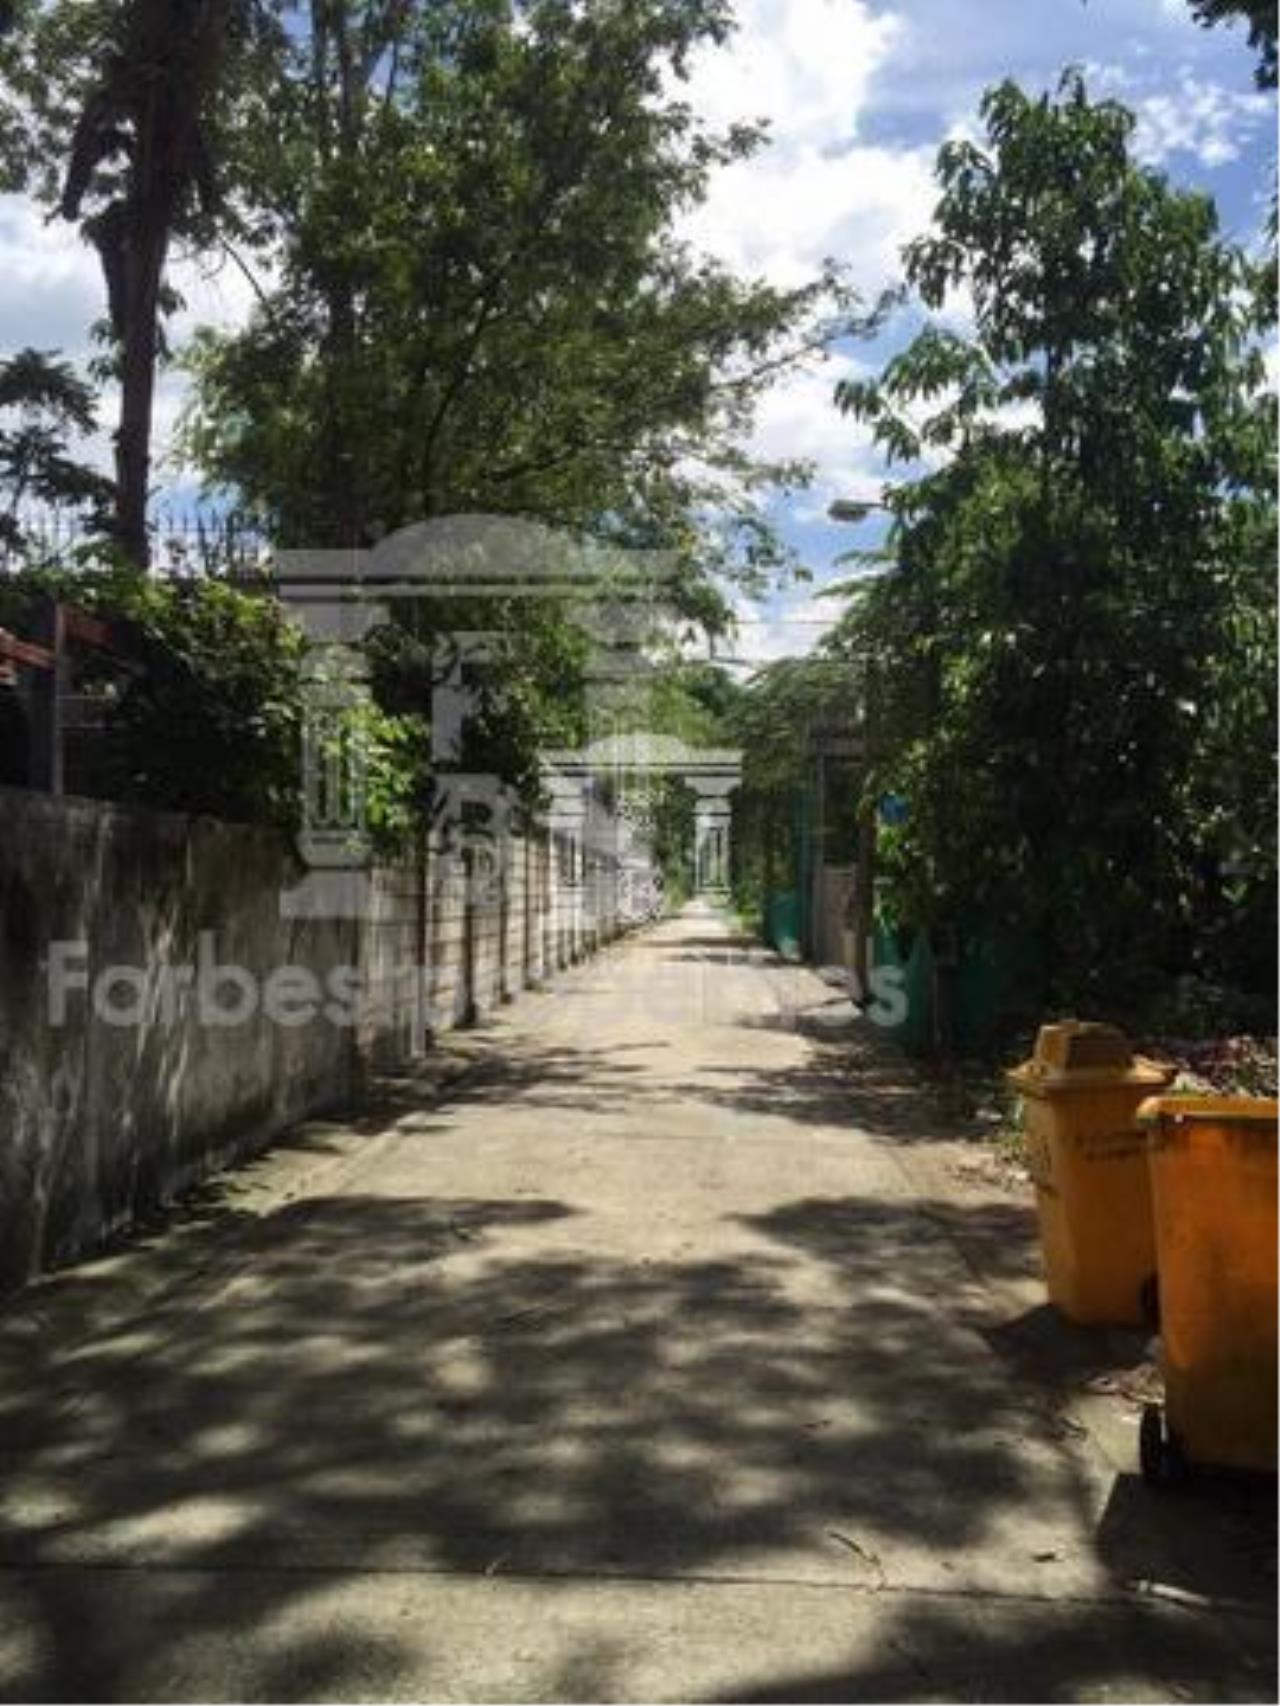 Forbest Properties Agency's 35689 -  Ram Inthra Road, Land for sale, plot size 720 Sq.m. 3